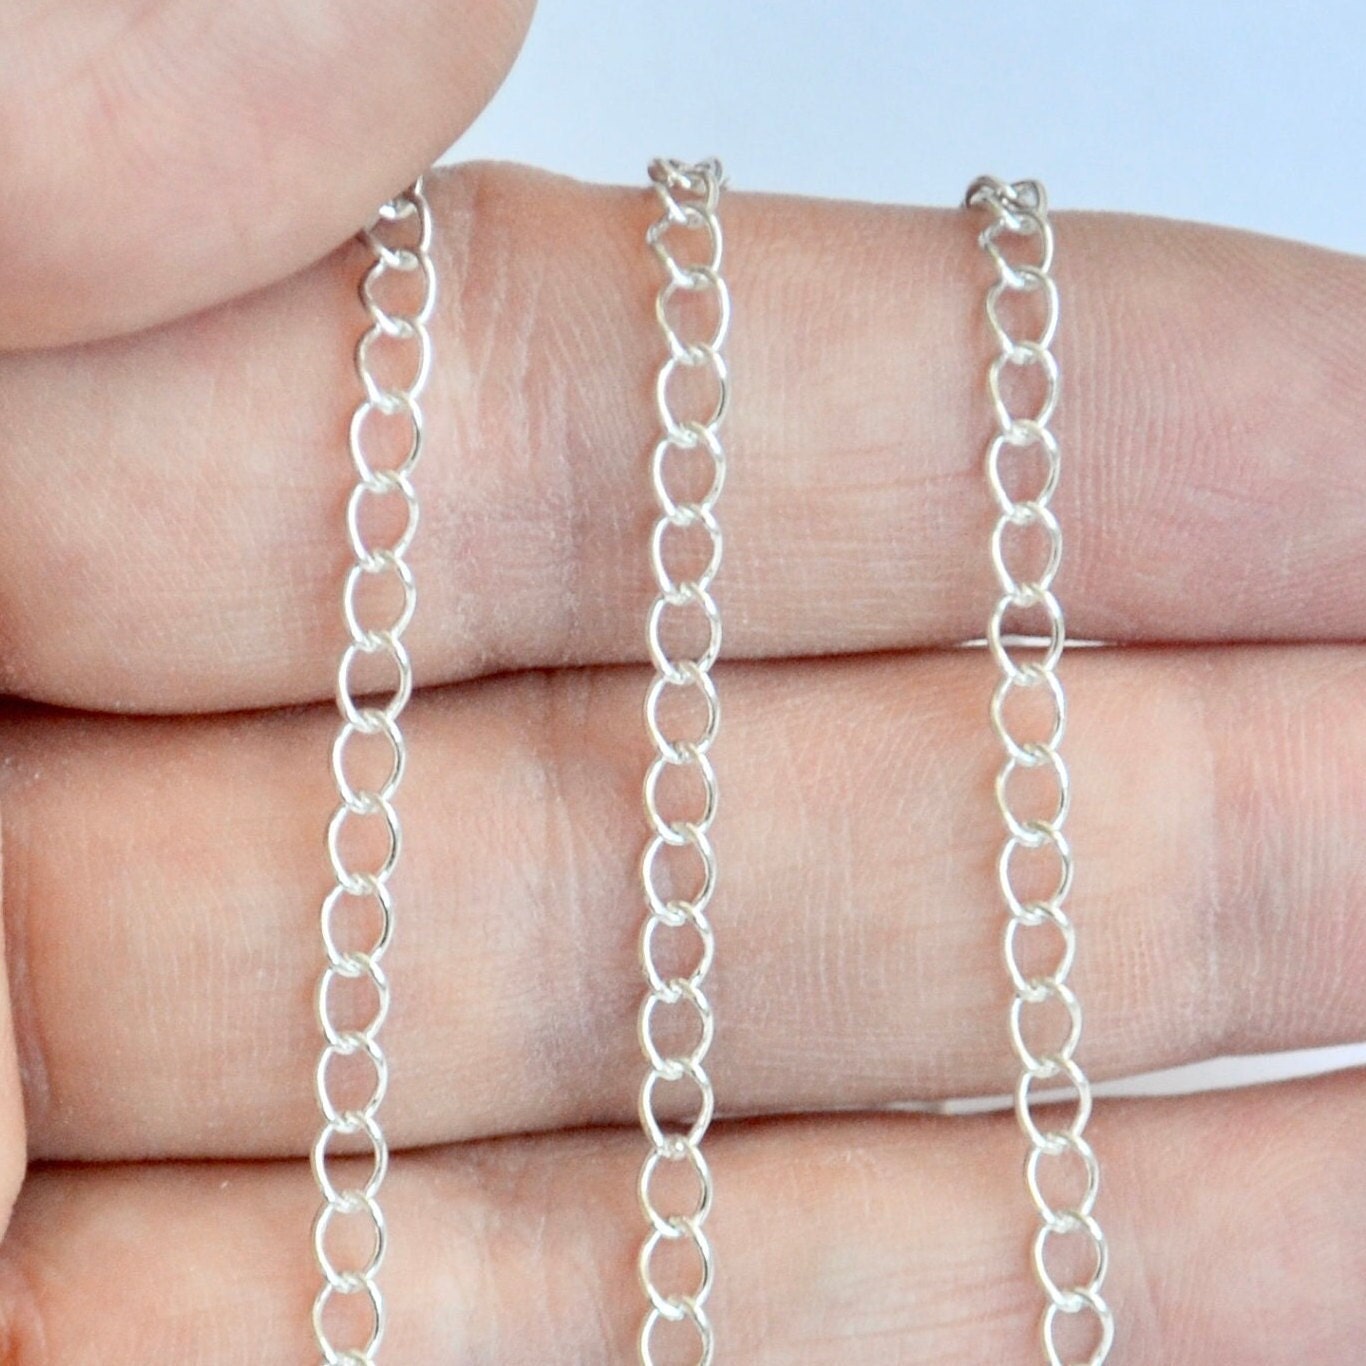 5cm / 10cm, 925 Sterling Silver Necklace Extension Chain Safety